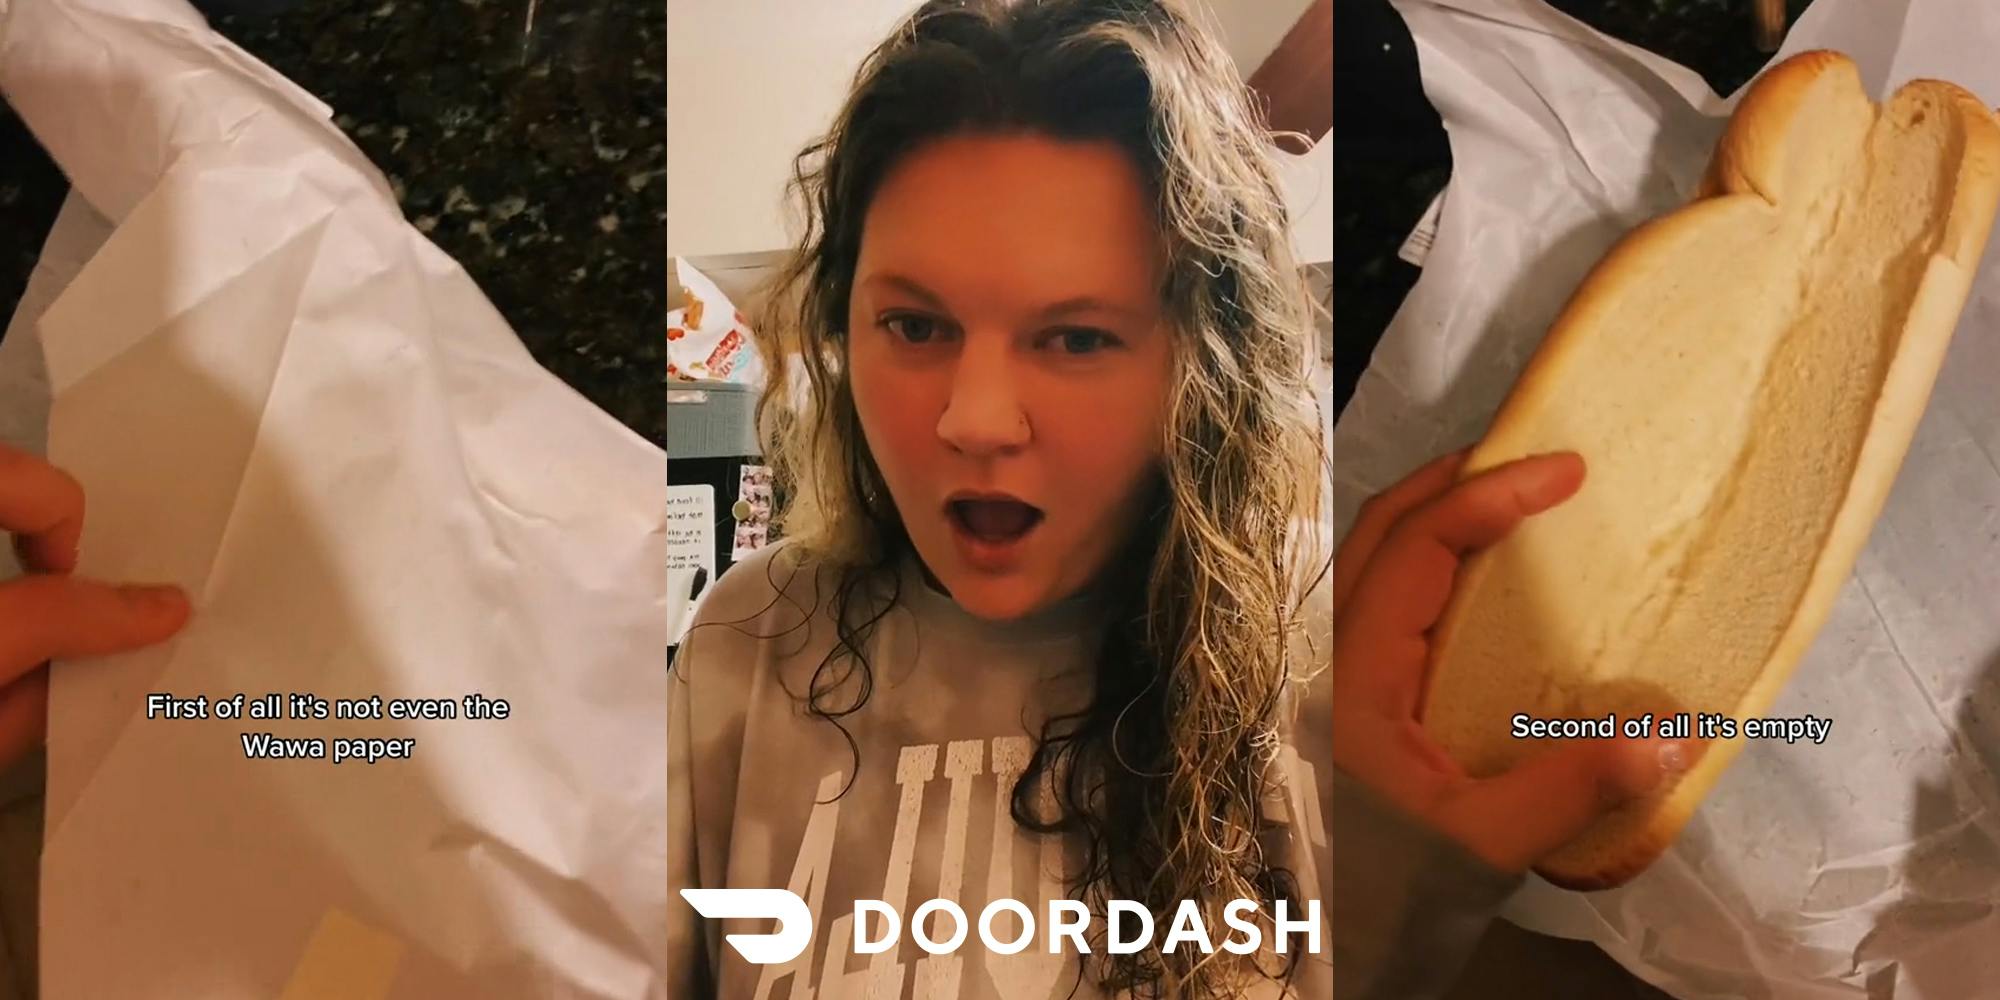 sub paper with hand holding edge on countertop caption "First of all it's not even the Wawa paper" (l) woman speaking with DoorDash white logo at bottom (c) hand spreading sub roll open to reveal empty inside caption "Second of all it's empty" (r)